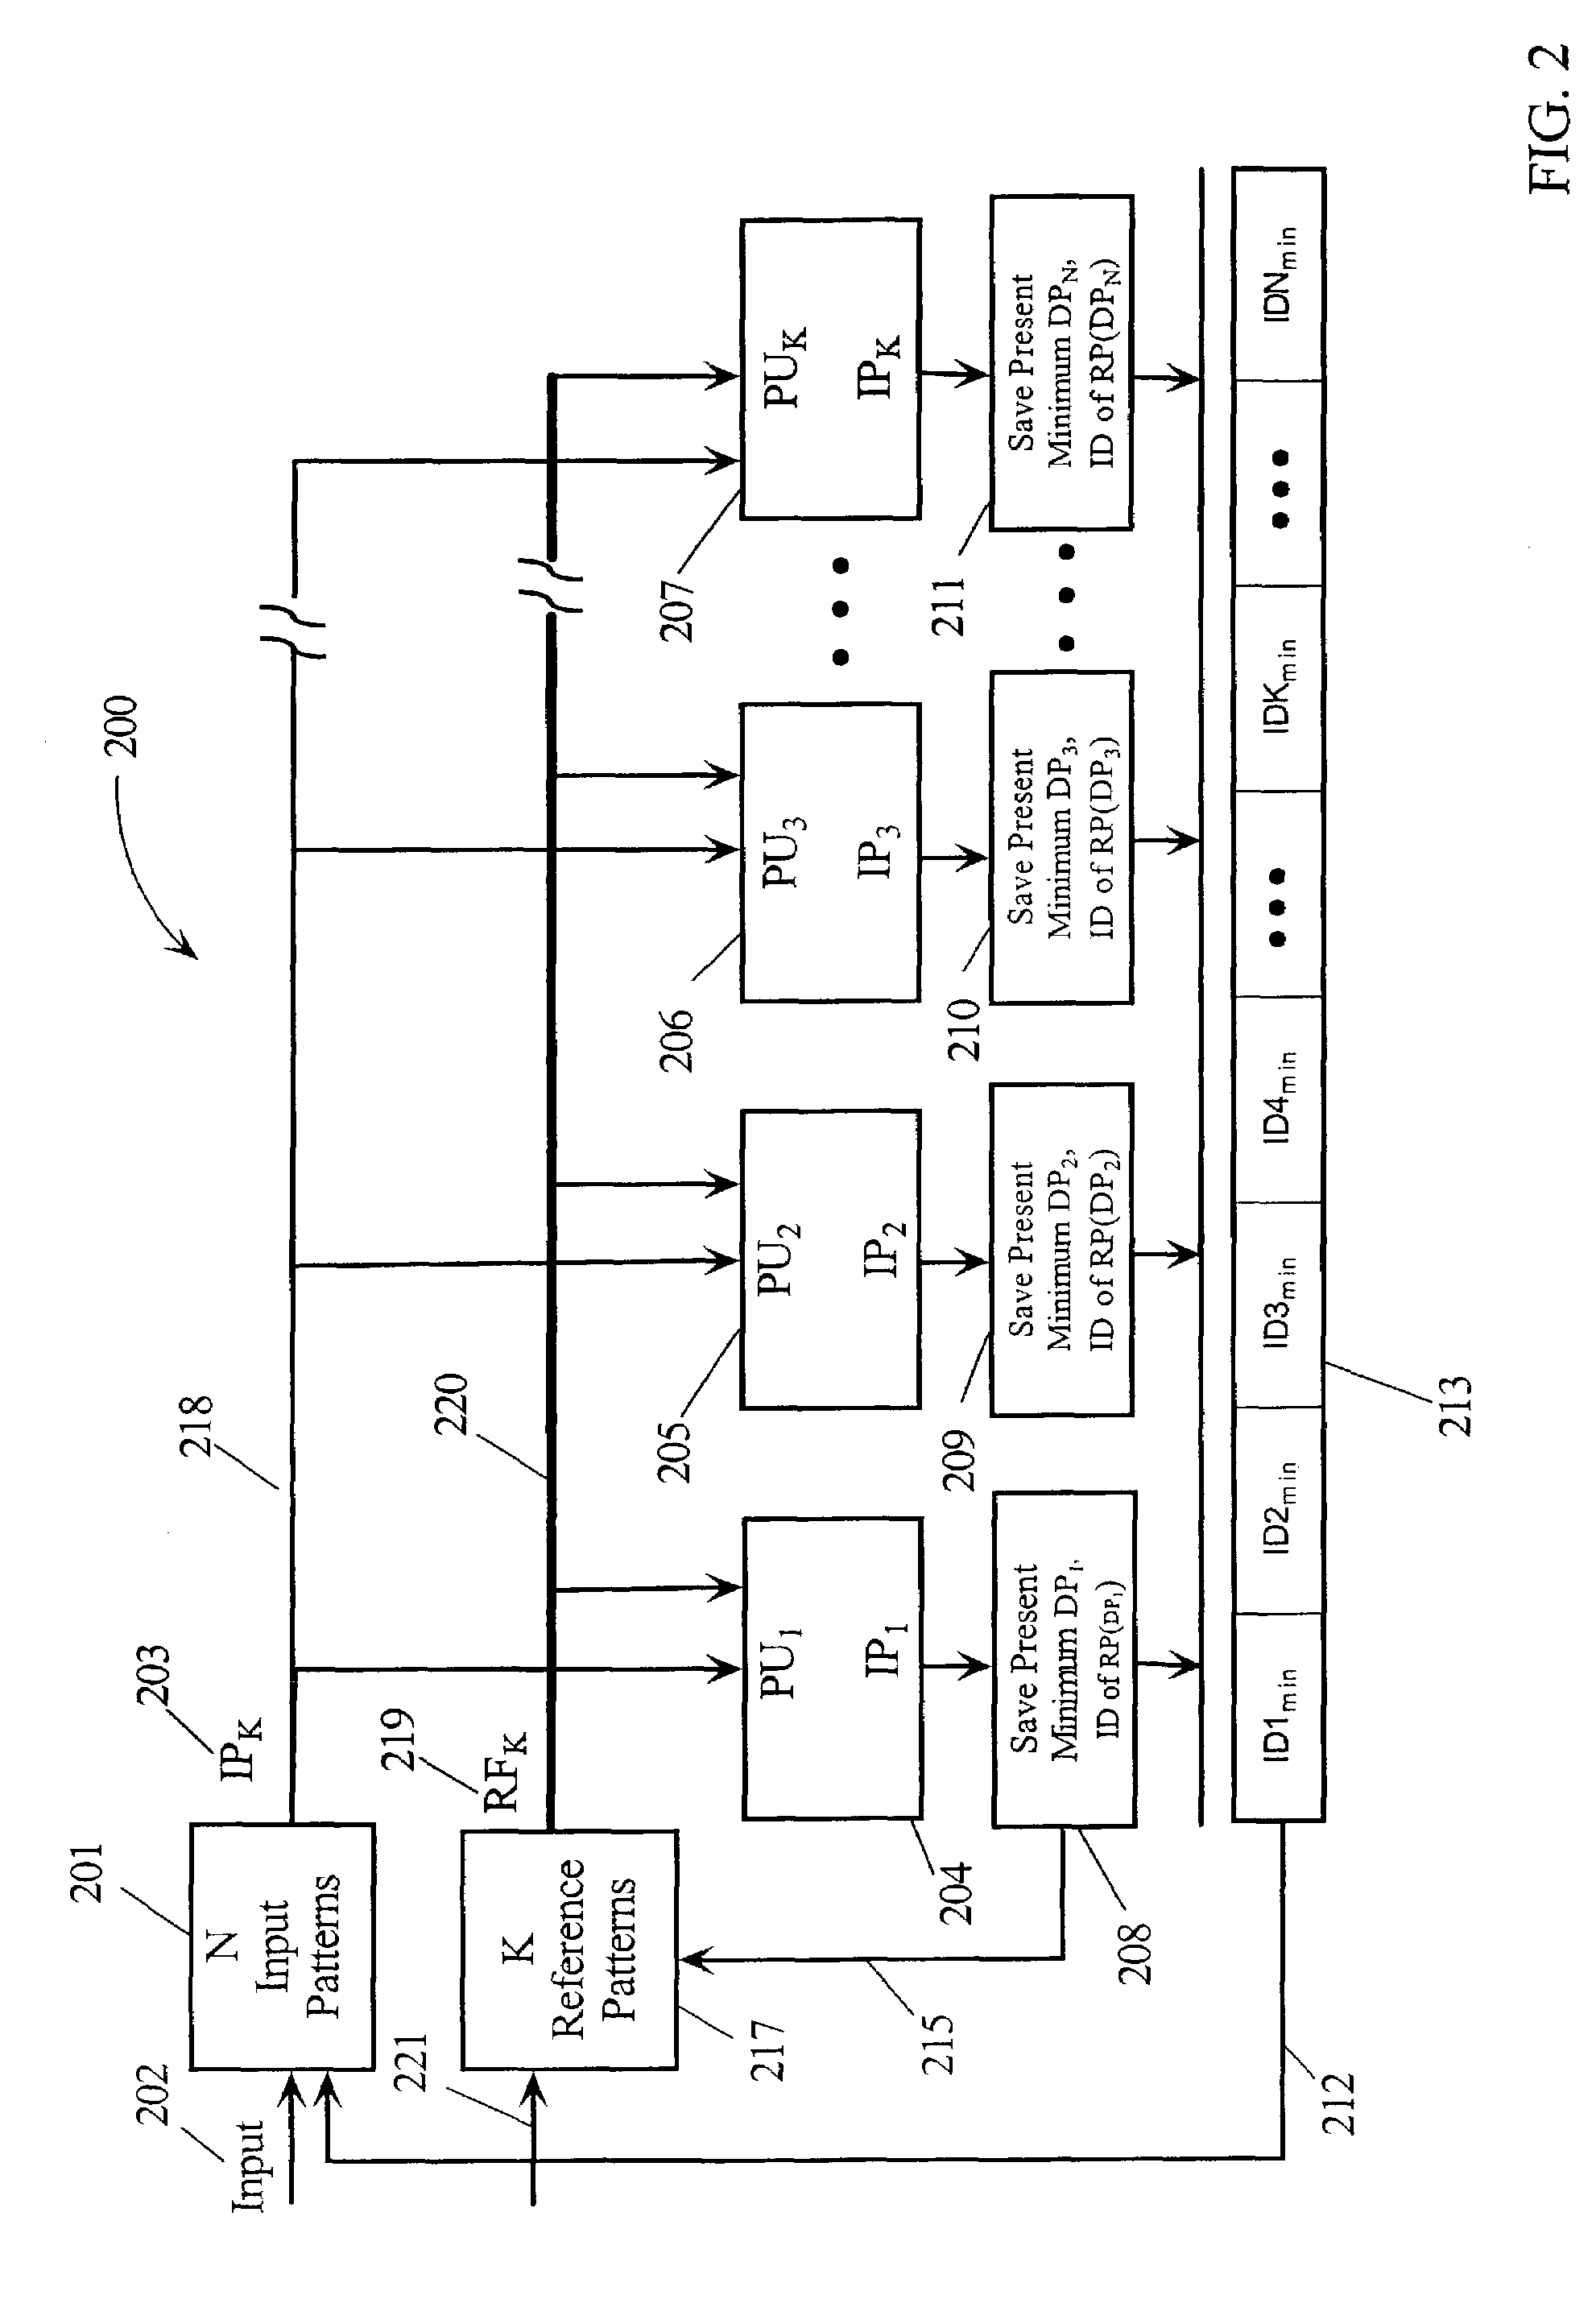 Method and apparatus for performing fast closest match in pattern recognition